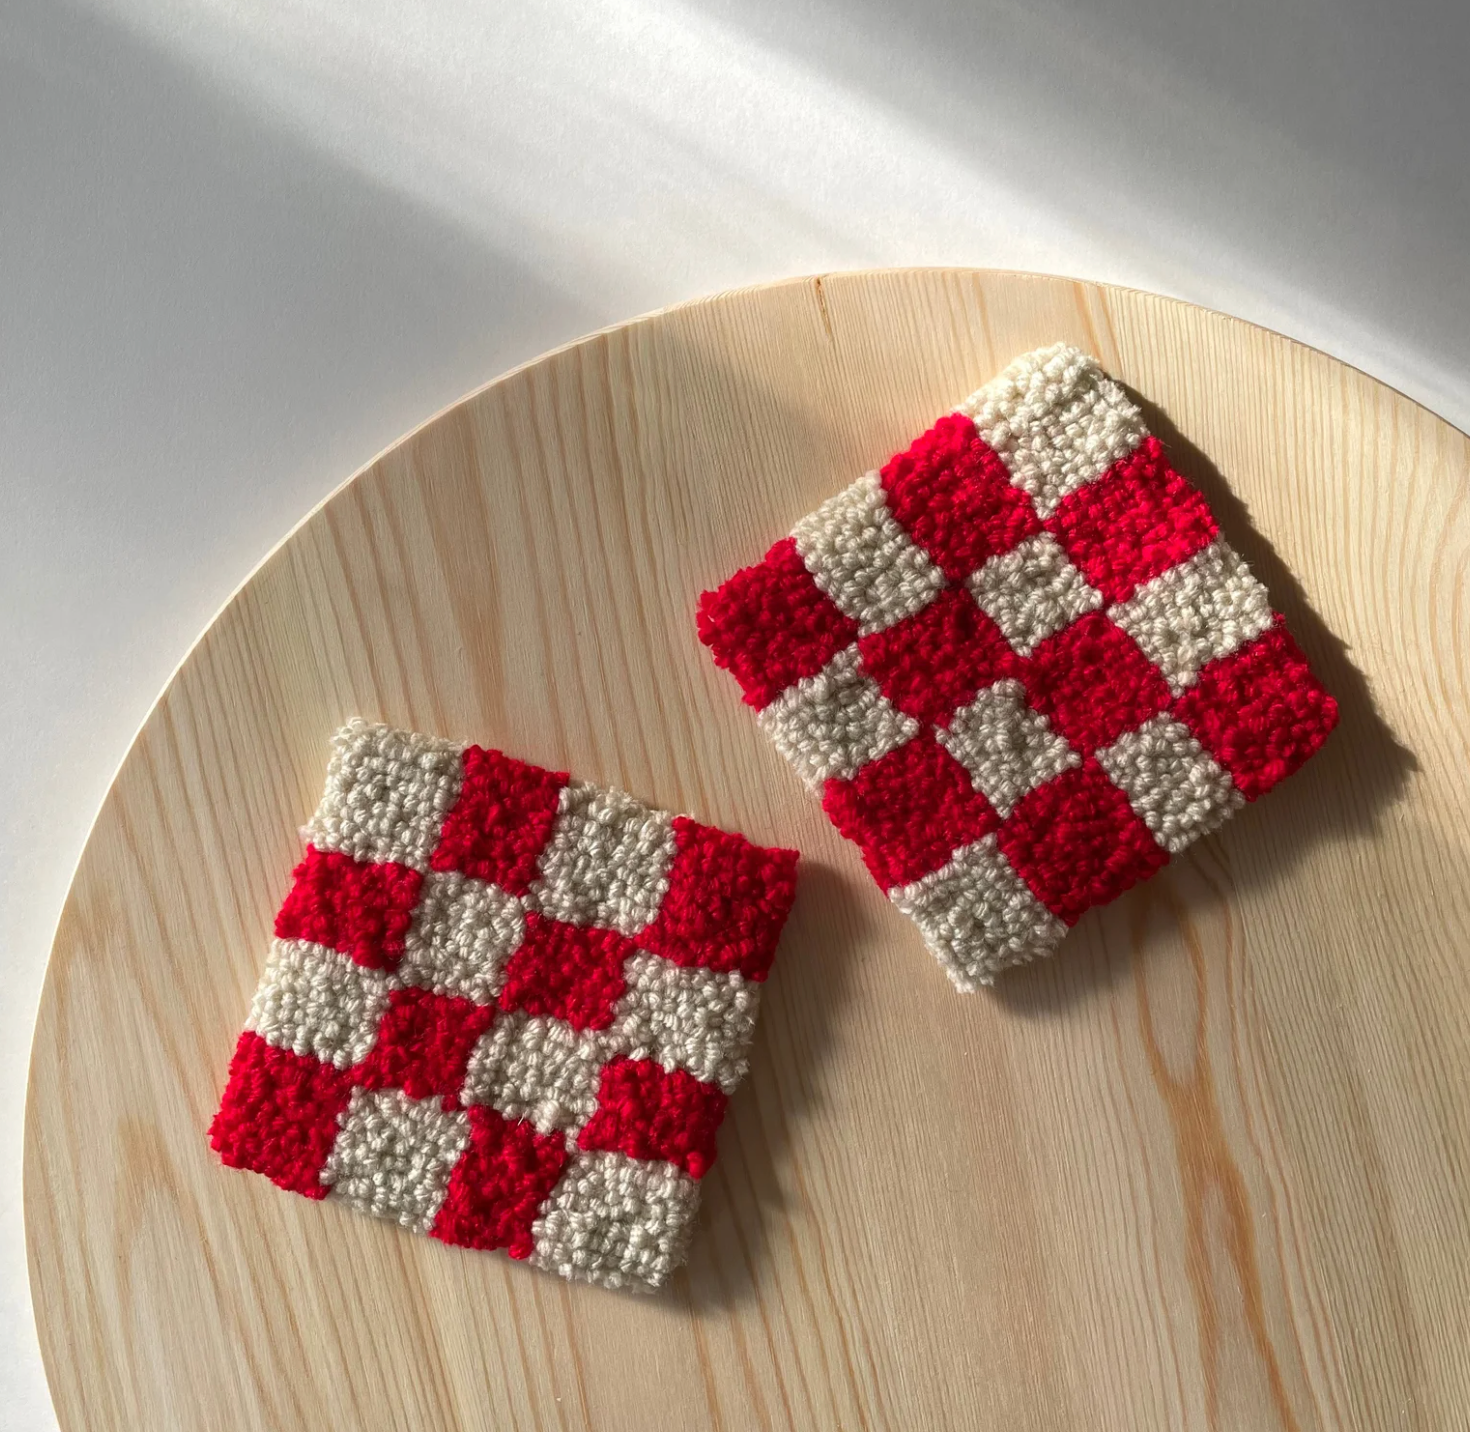 Checkerboard tufted coasters in red and cream, created by Annemade Studio